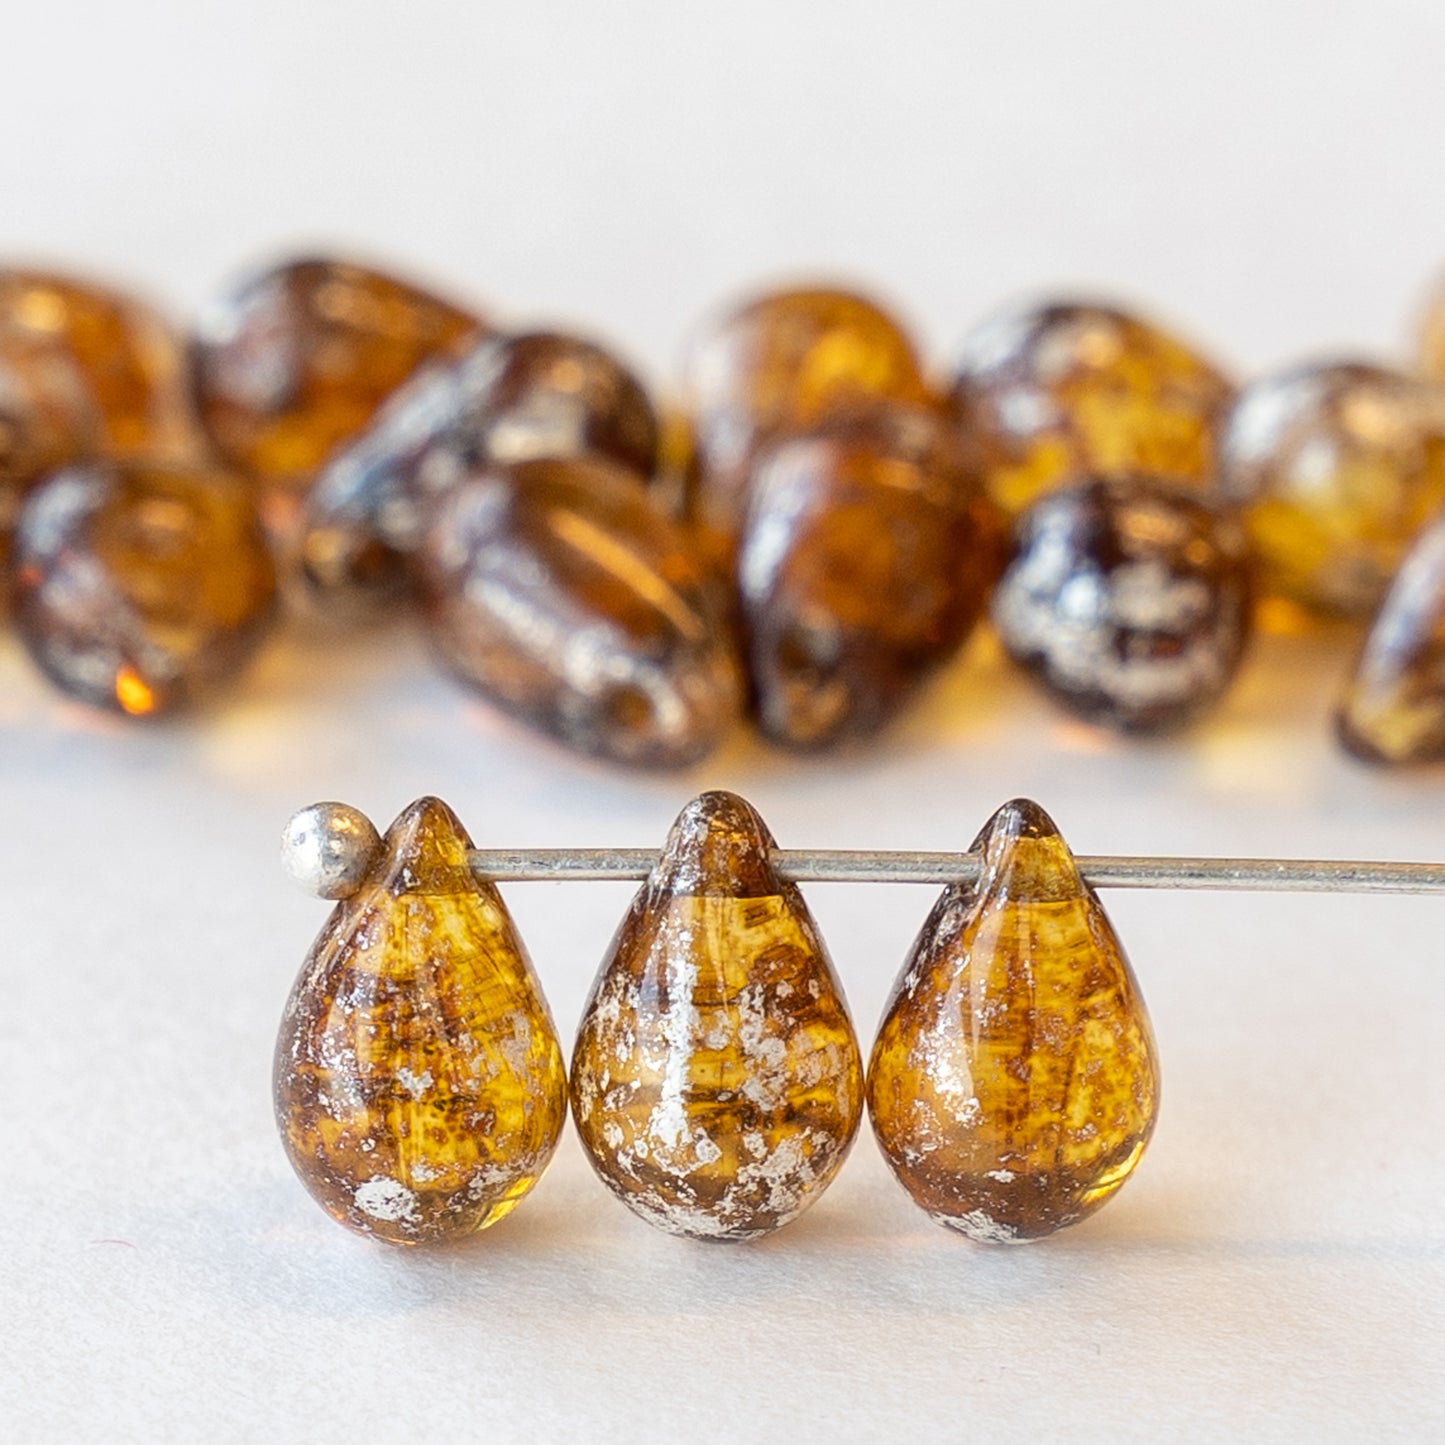 Load image into Gallery viewer, 6x9mm Glass Teardrop Beads - Amber Mercury Beads - 25 Beads
